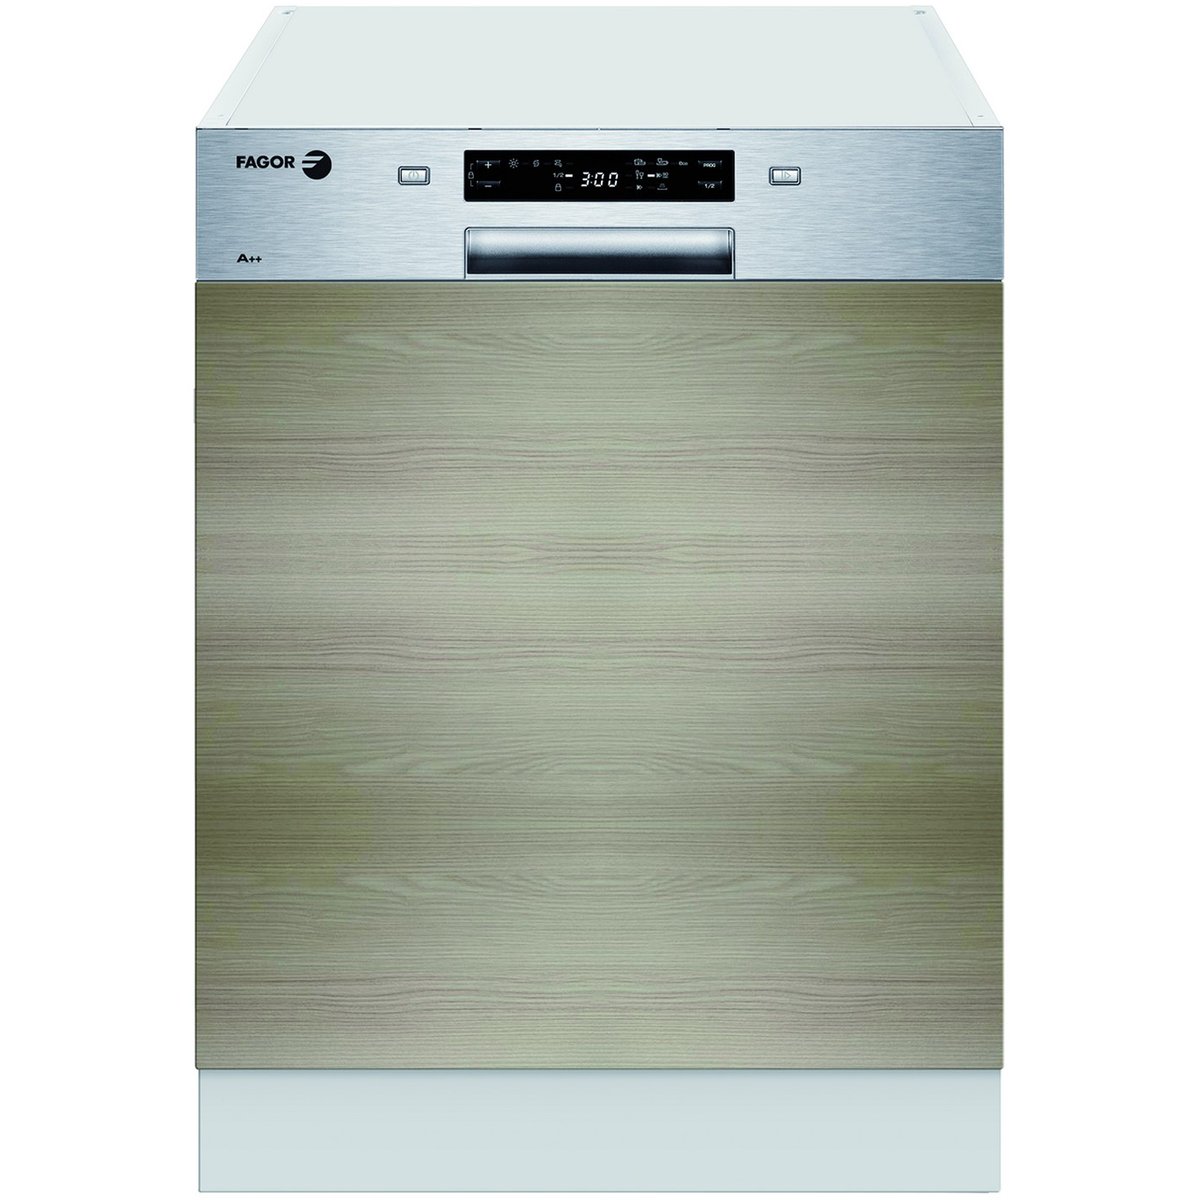 Fagor Semi Integrated Built-In Dishwasher, 7 Wash Program, Stainless Steel, LVF17IAX